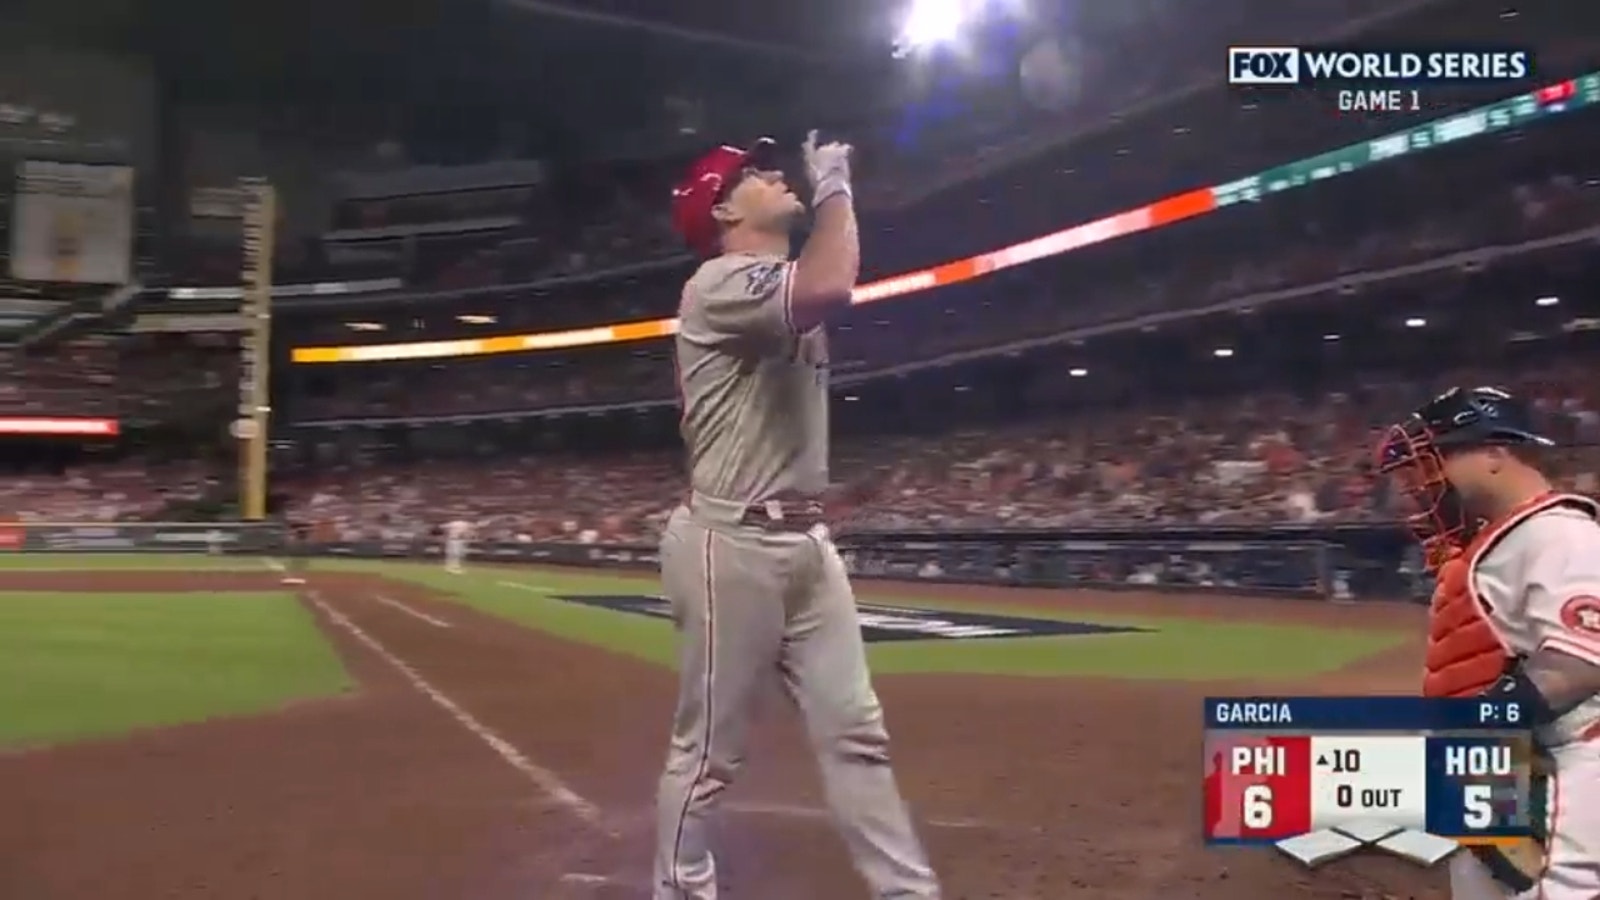 Ranger Suárez delivers for Phillies in World Series Game 1